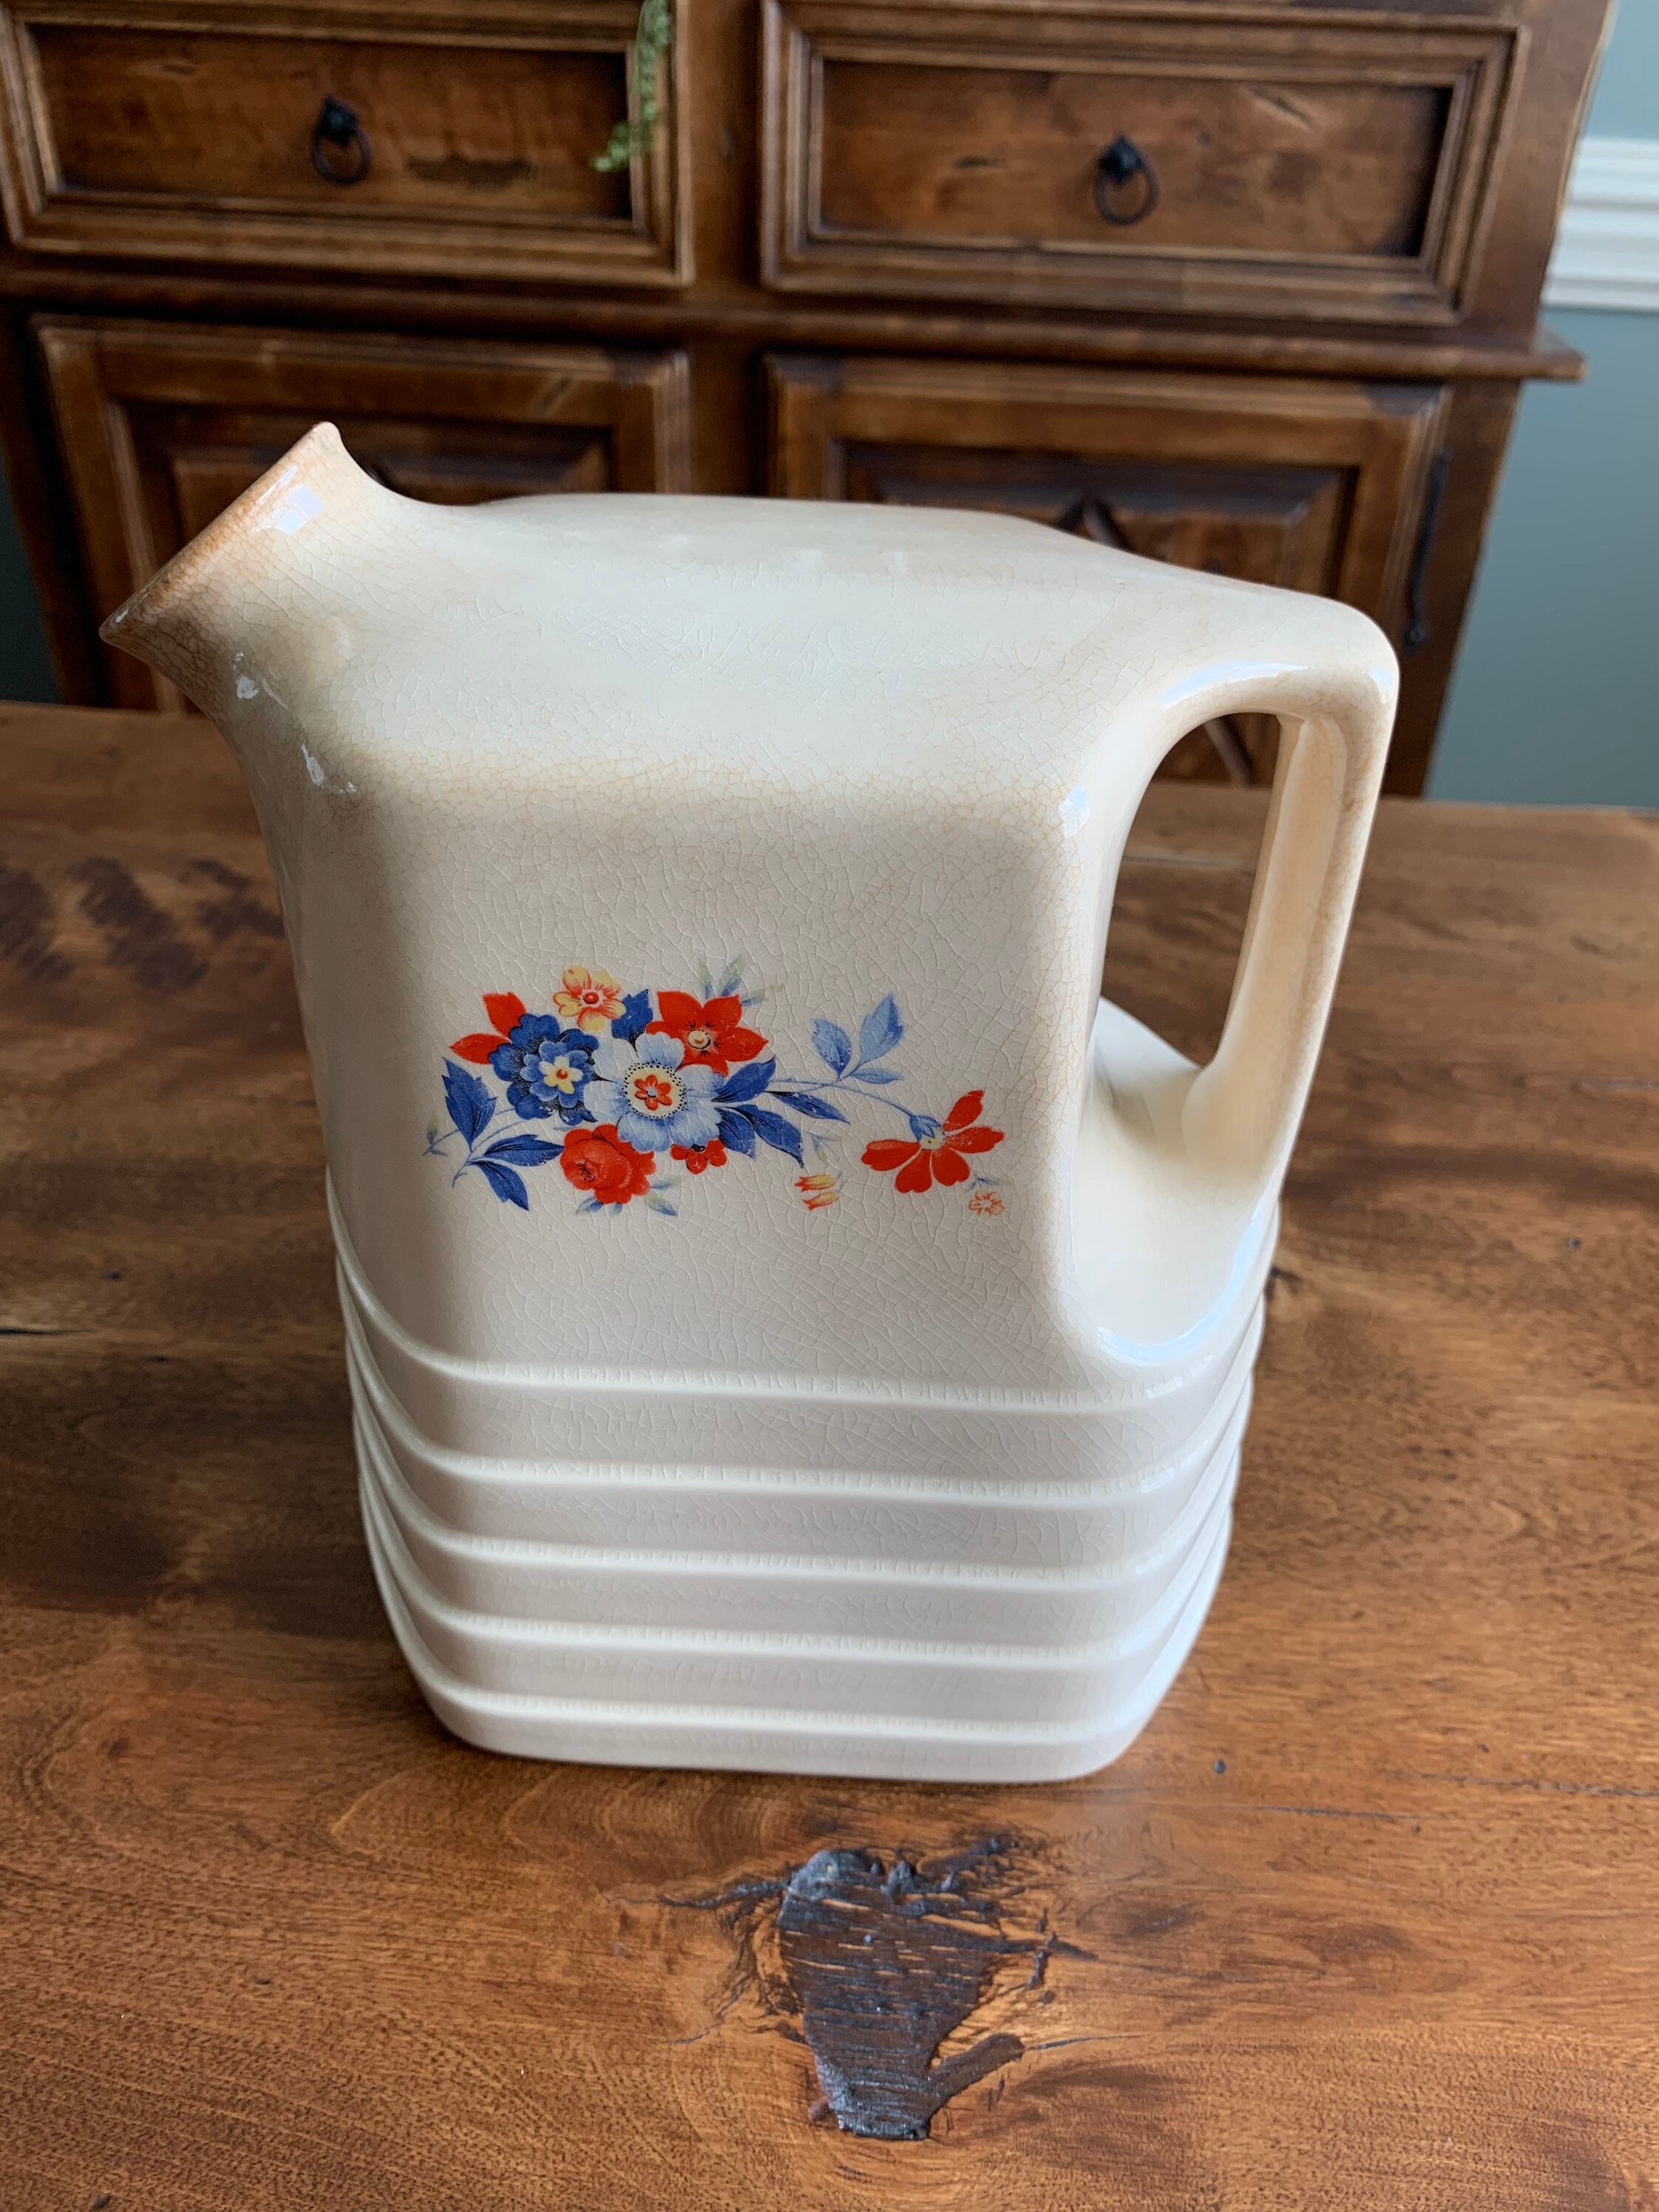 Vintage Mid Century Kitchen Bouquet Pitcher with Lid Universal Pottery